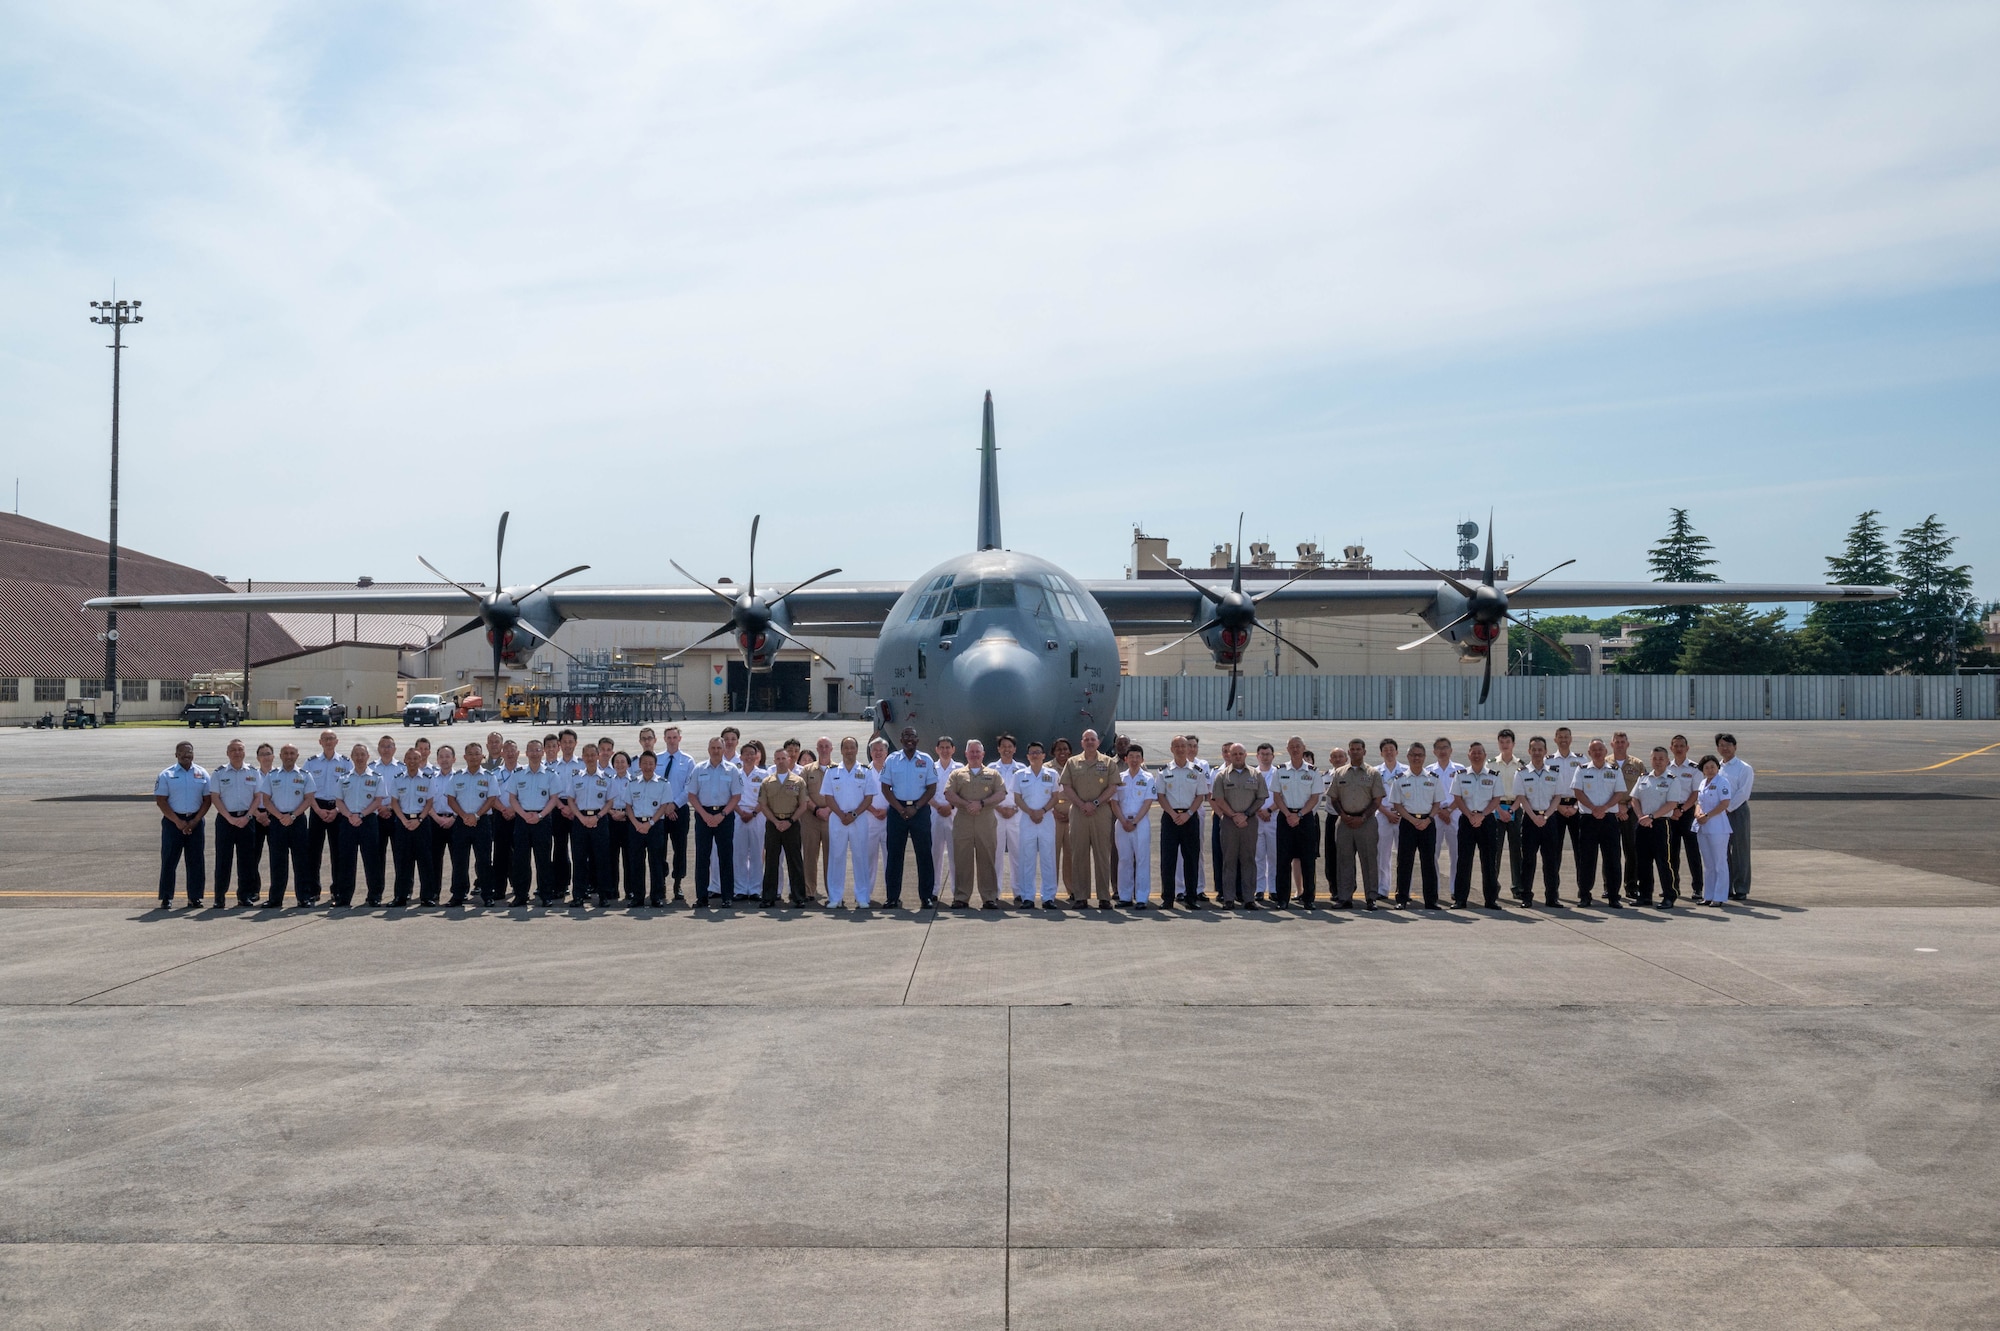 American and Japanese military members pose for a group photo in front of a C-130J Super Hercules at Yokota Air Base, Japan.